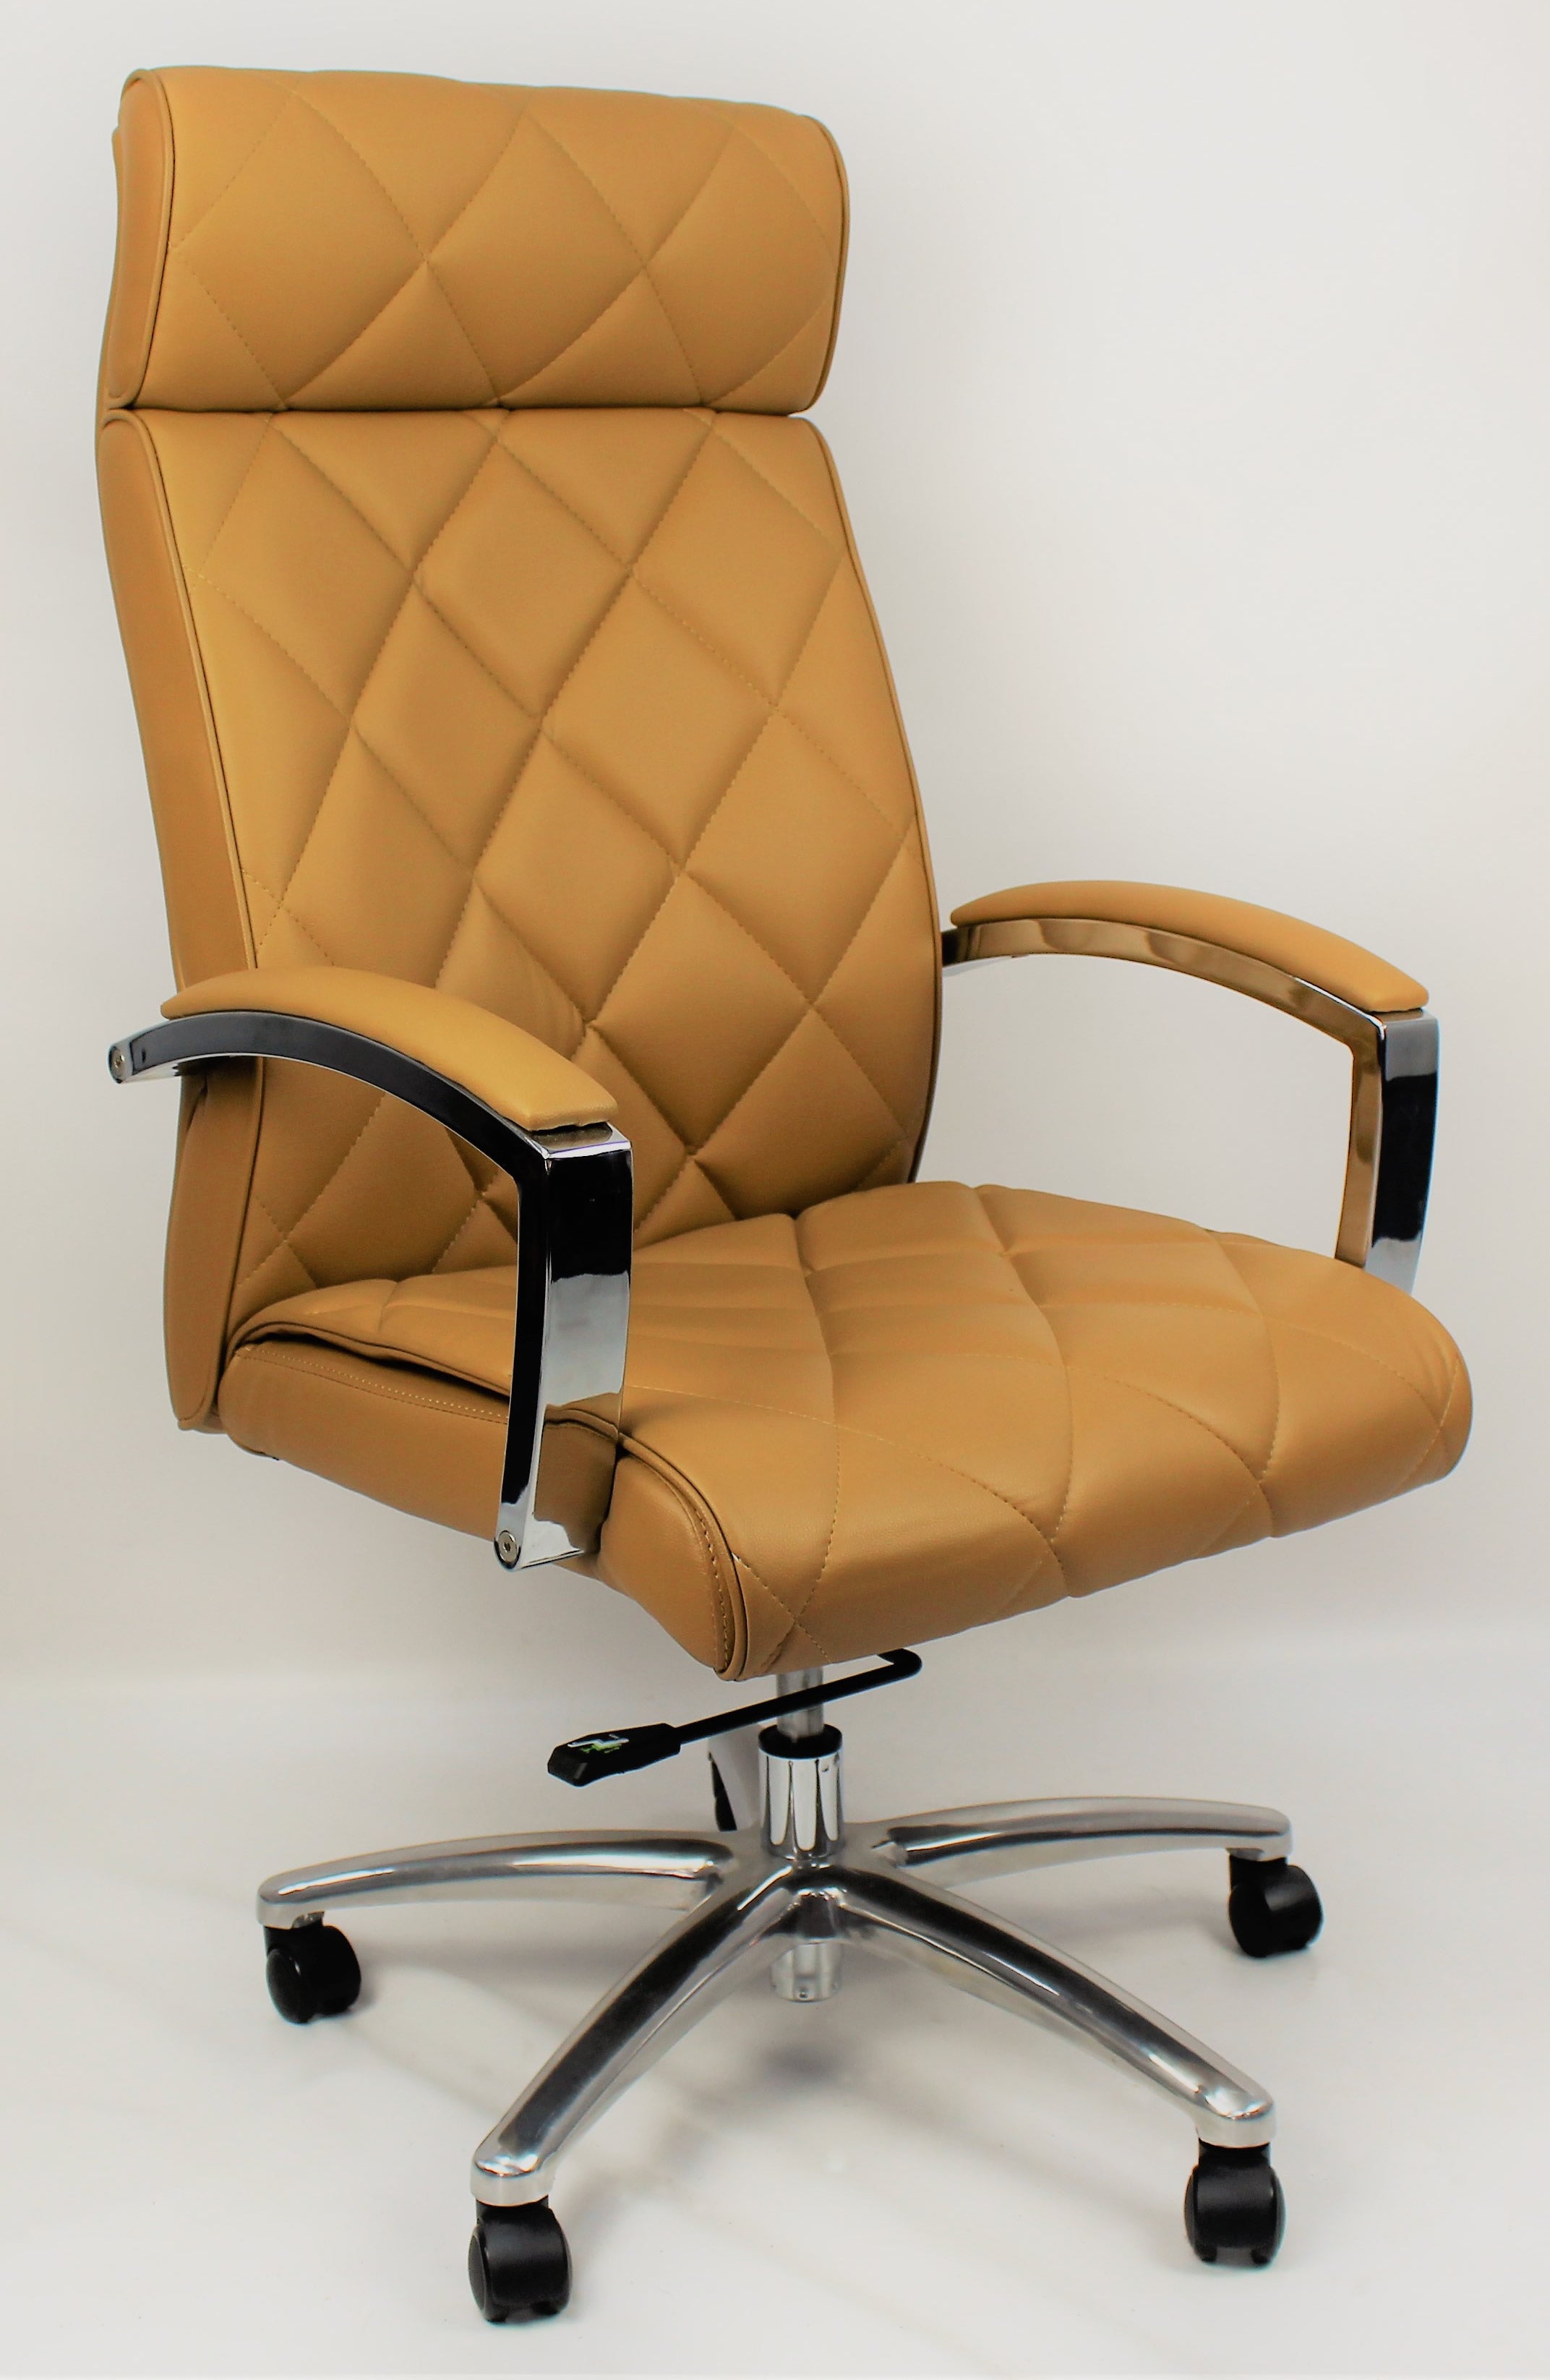 Beige Leather Executive Office Chair - ZM-A217 UK